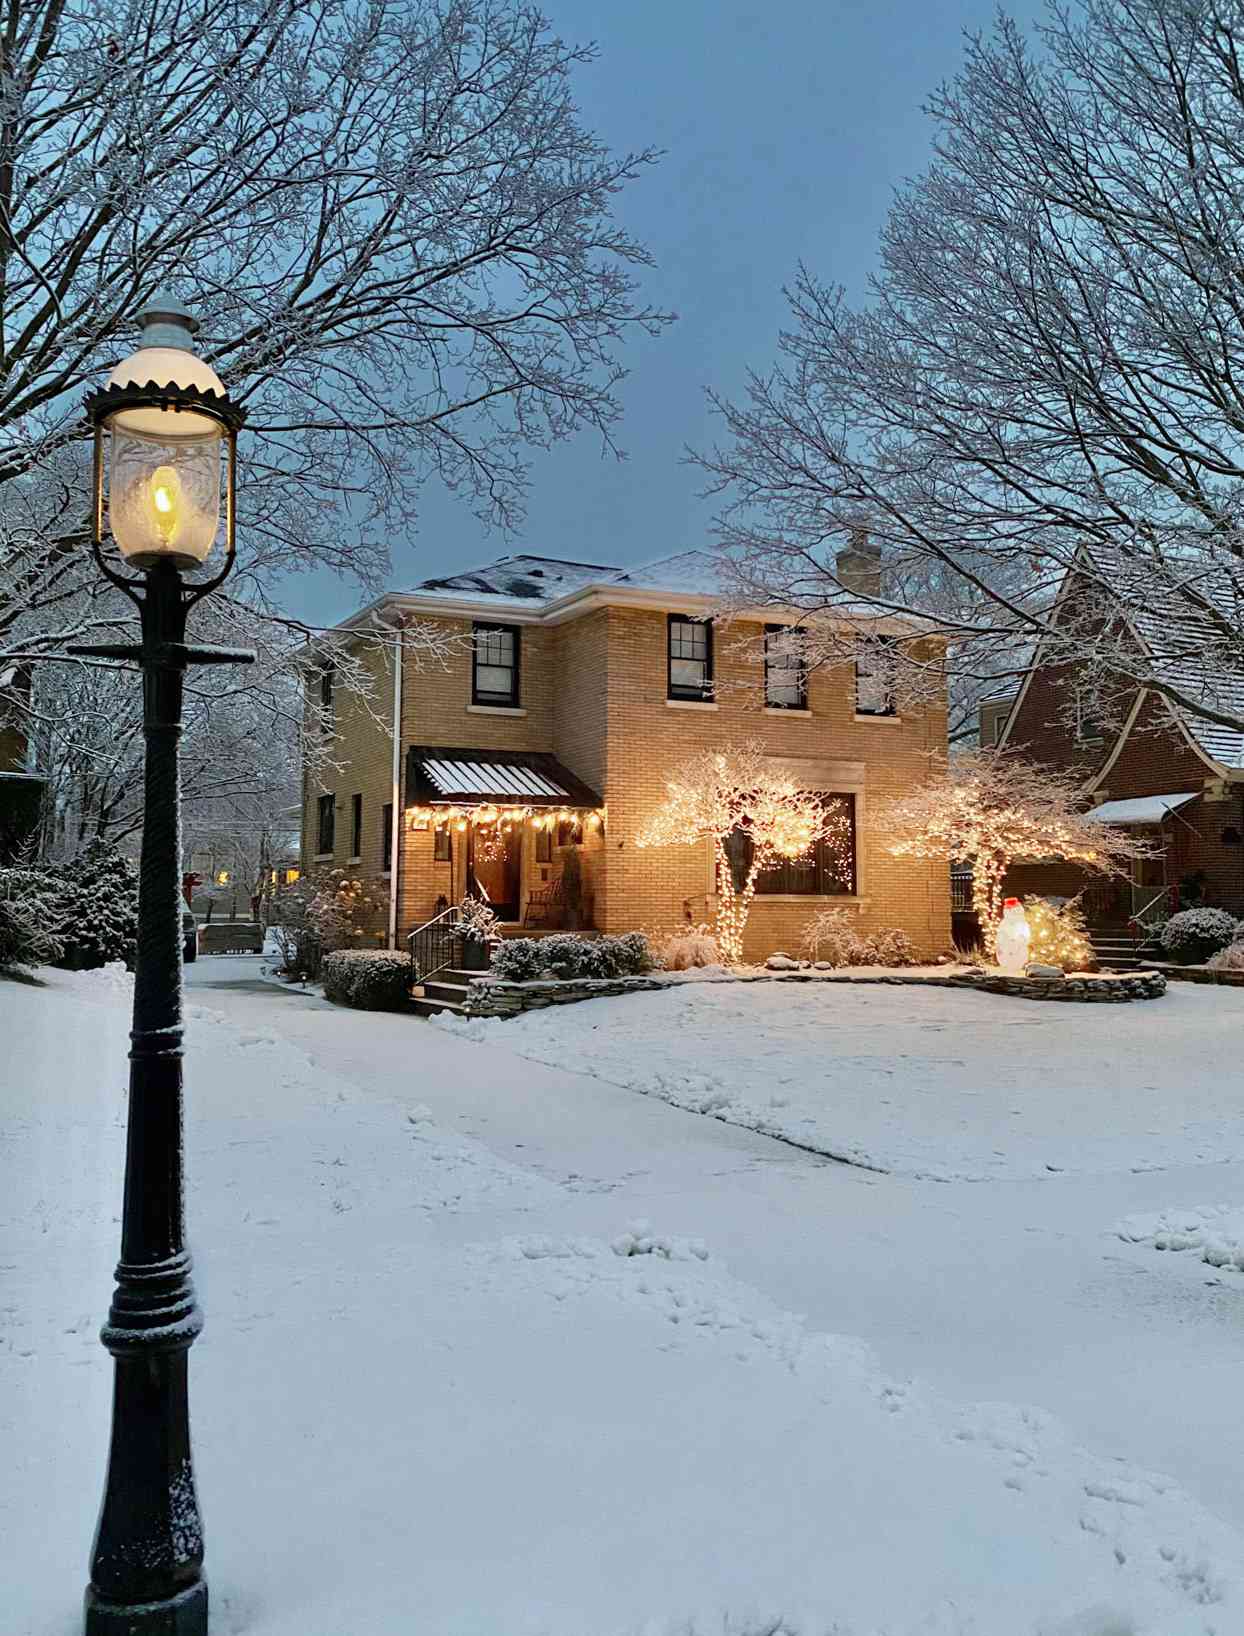 outside view of home in snow